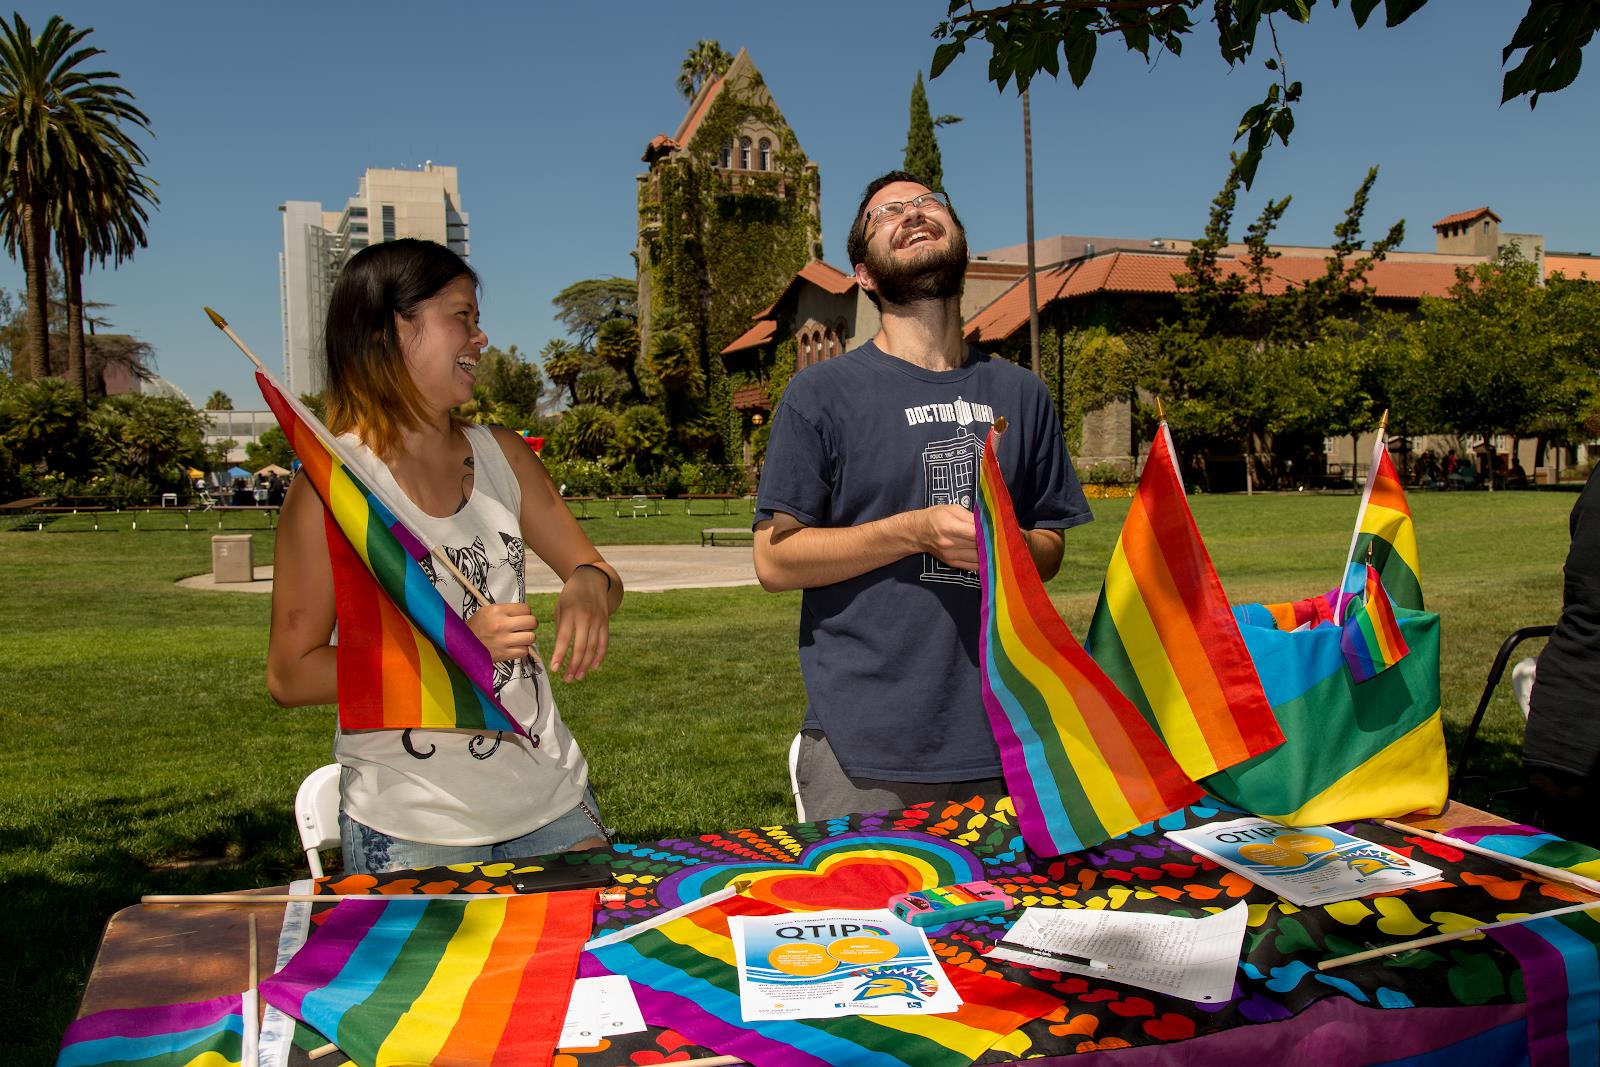 Students tabling for student org laughing and holding rainbow flags.